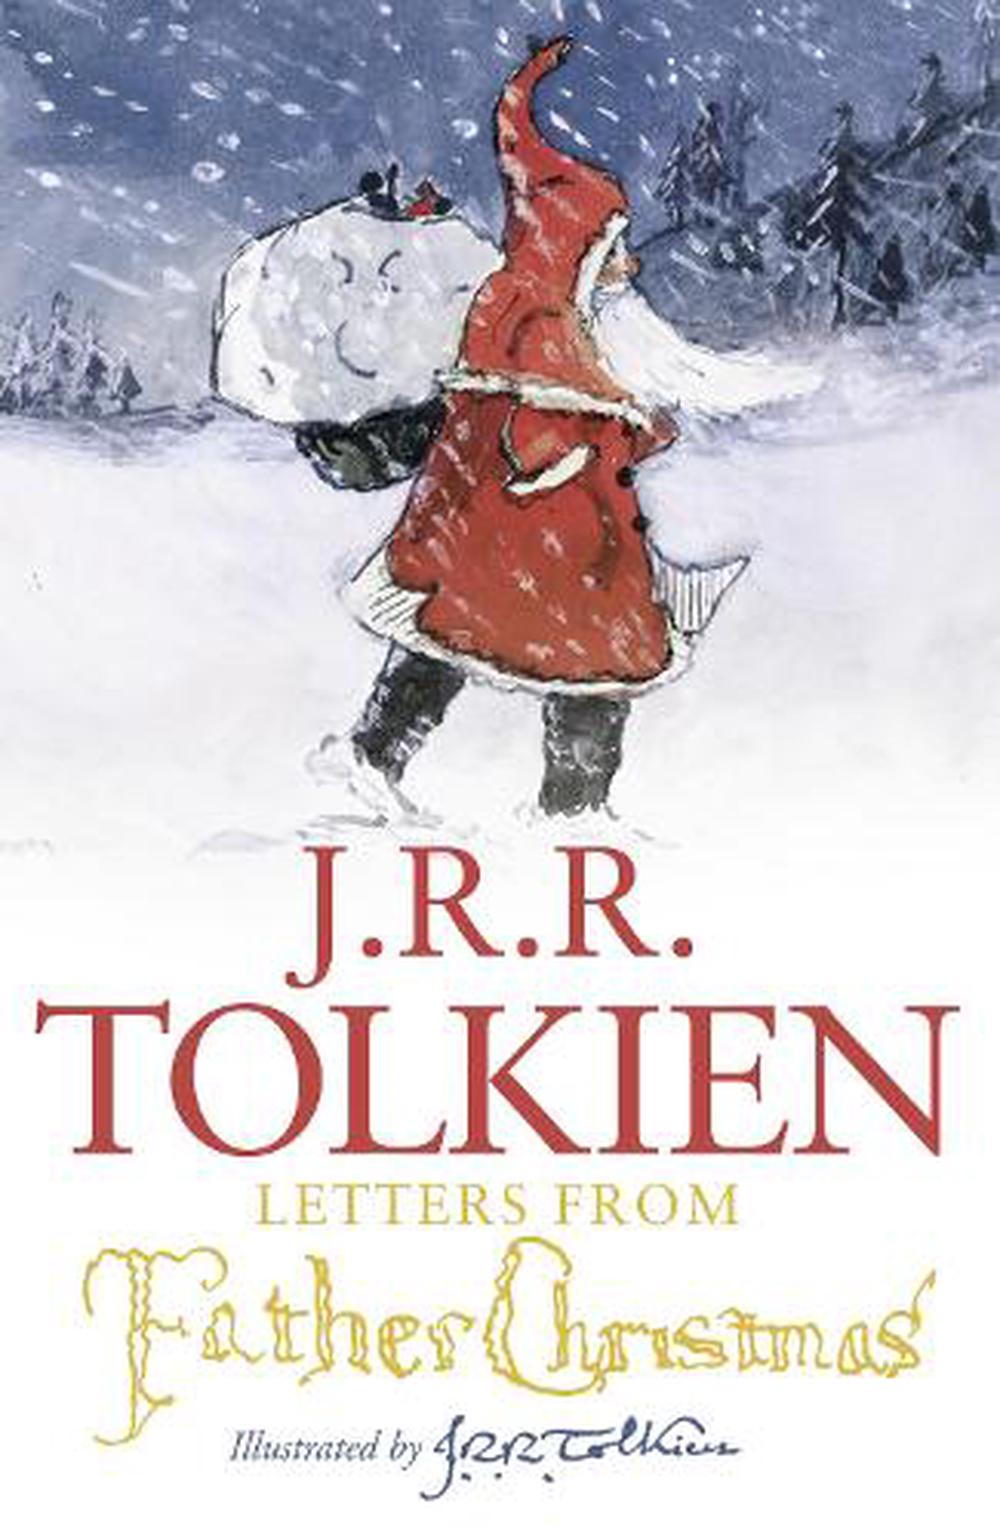 letters from father christmas by jrr tolkien